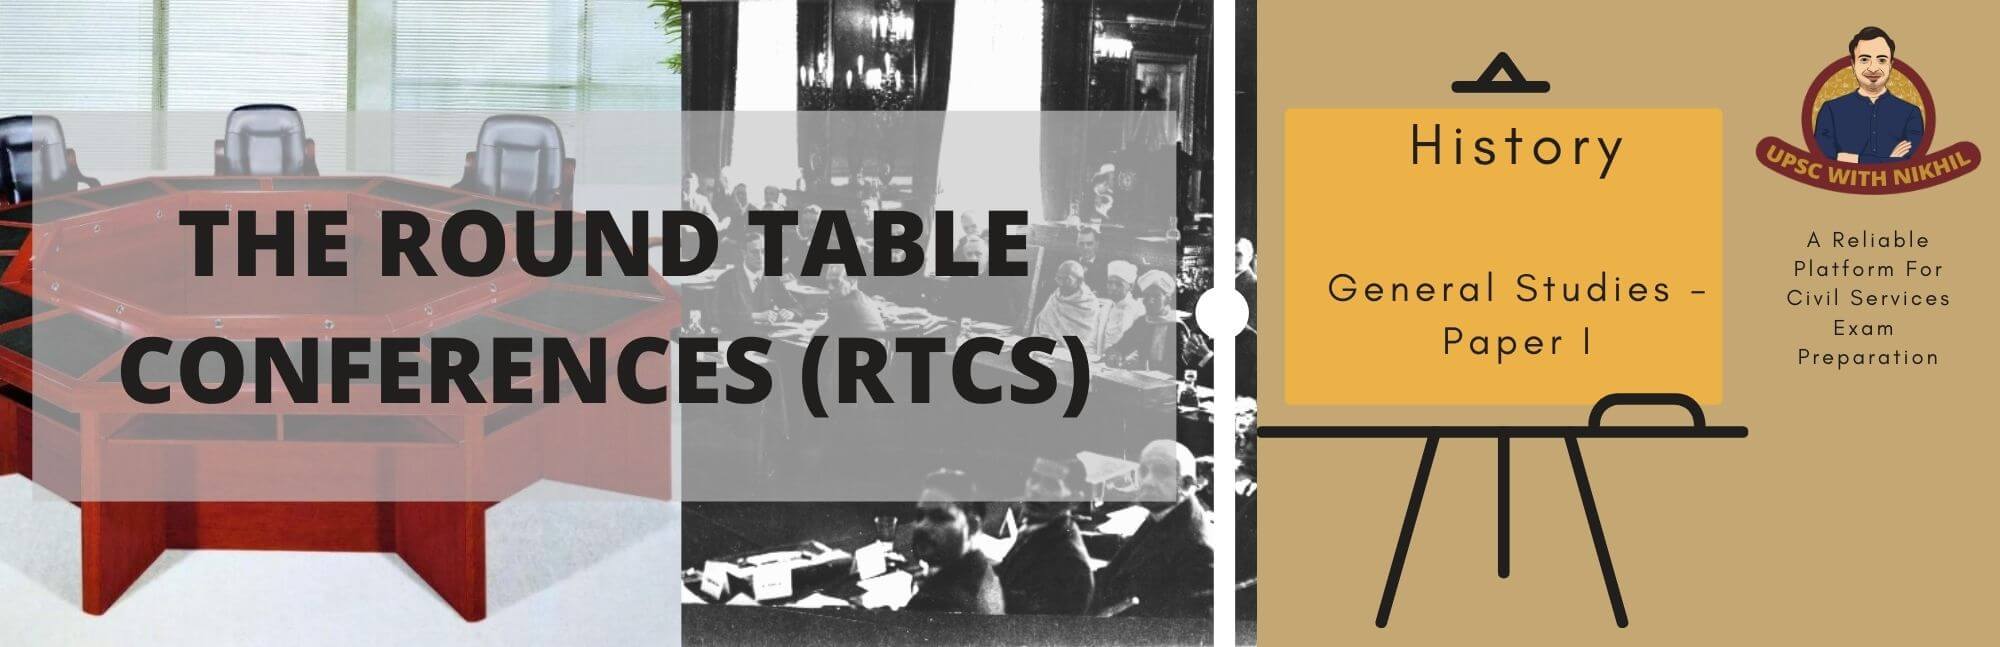 The Round Table Conferences Rtcs, Why It Is Called Round Table Conference